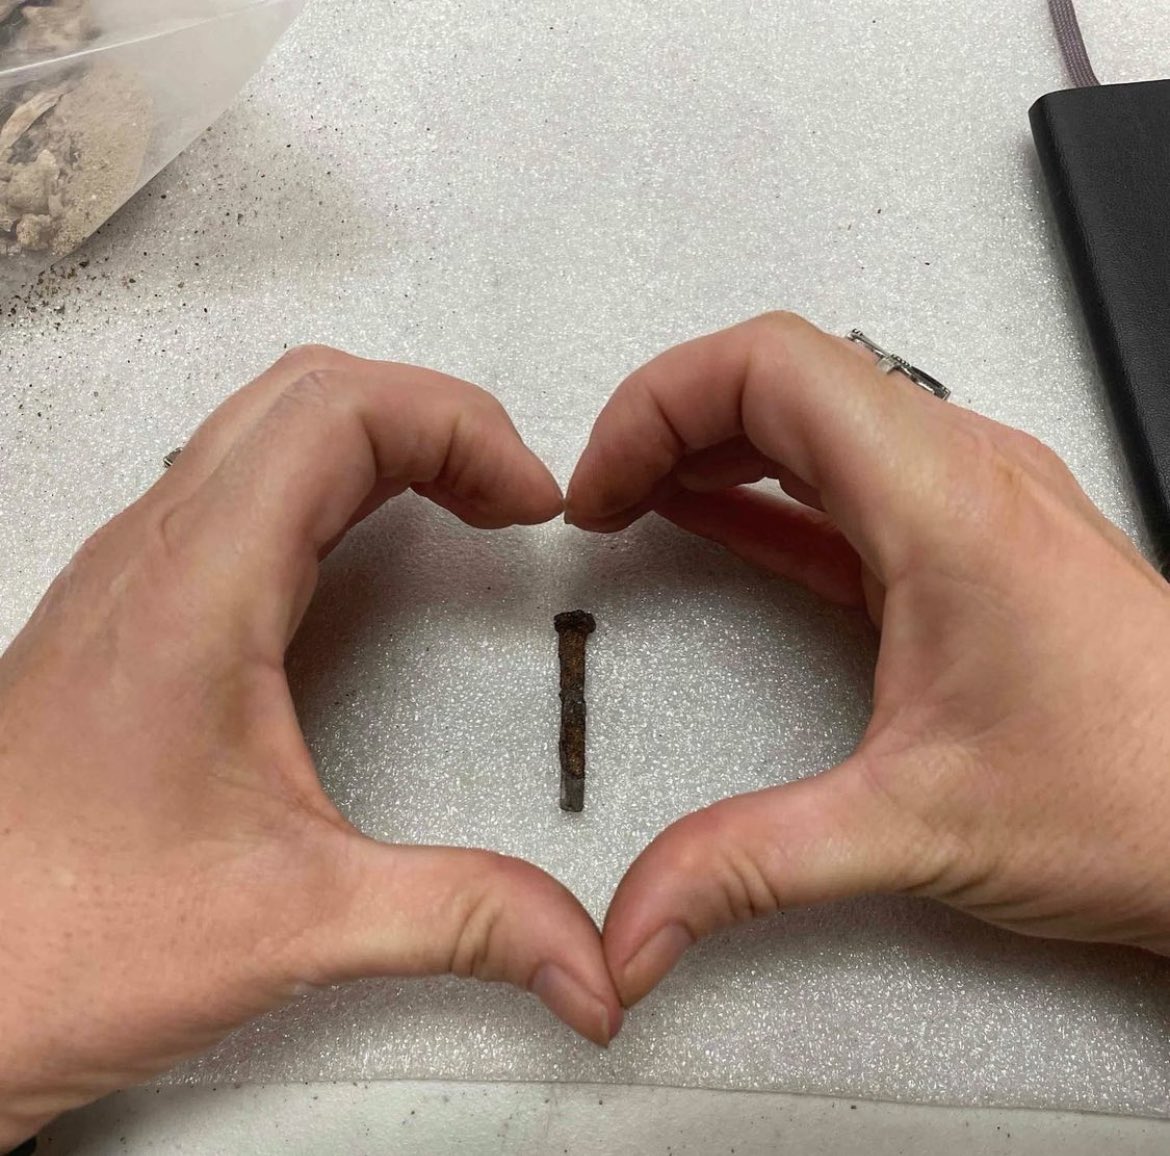 One night only: hear me talk about my second favorite artifact type, the humble nail:) Tonight, 7 pm, free and open to the public. #archaeology #artifacts #pubarch